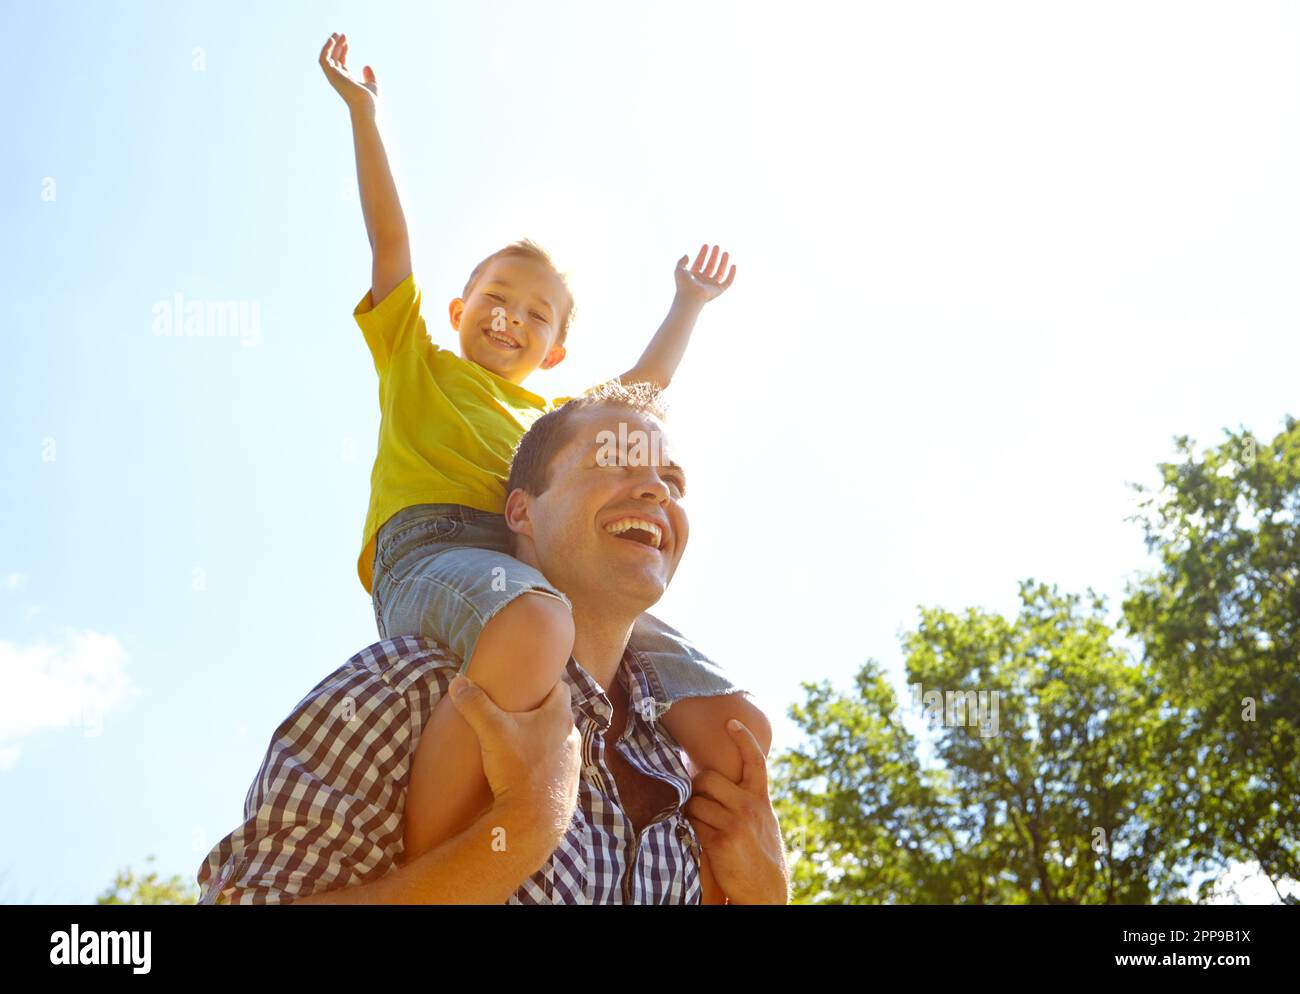 Yay. Low angle shot of a cute young boy smiling widely while riding on his dads shoulders outdoors. Stock Photo